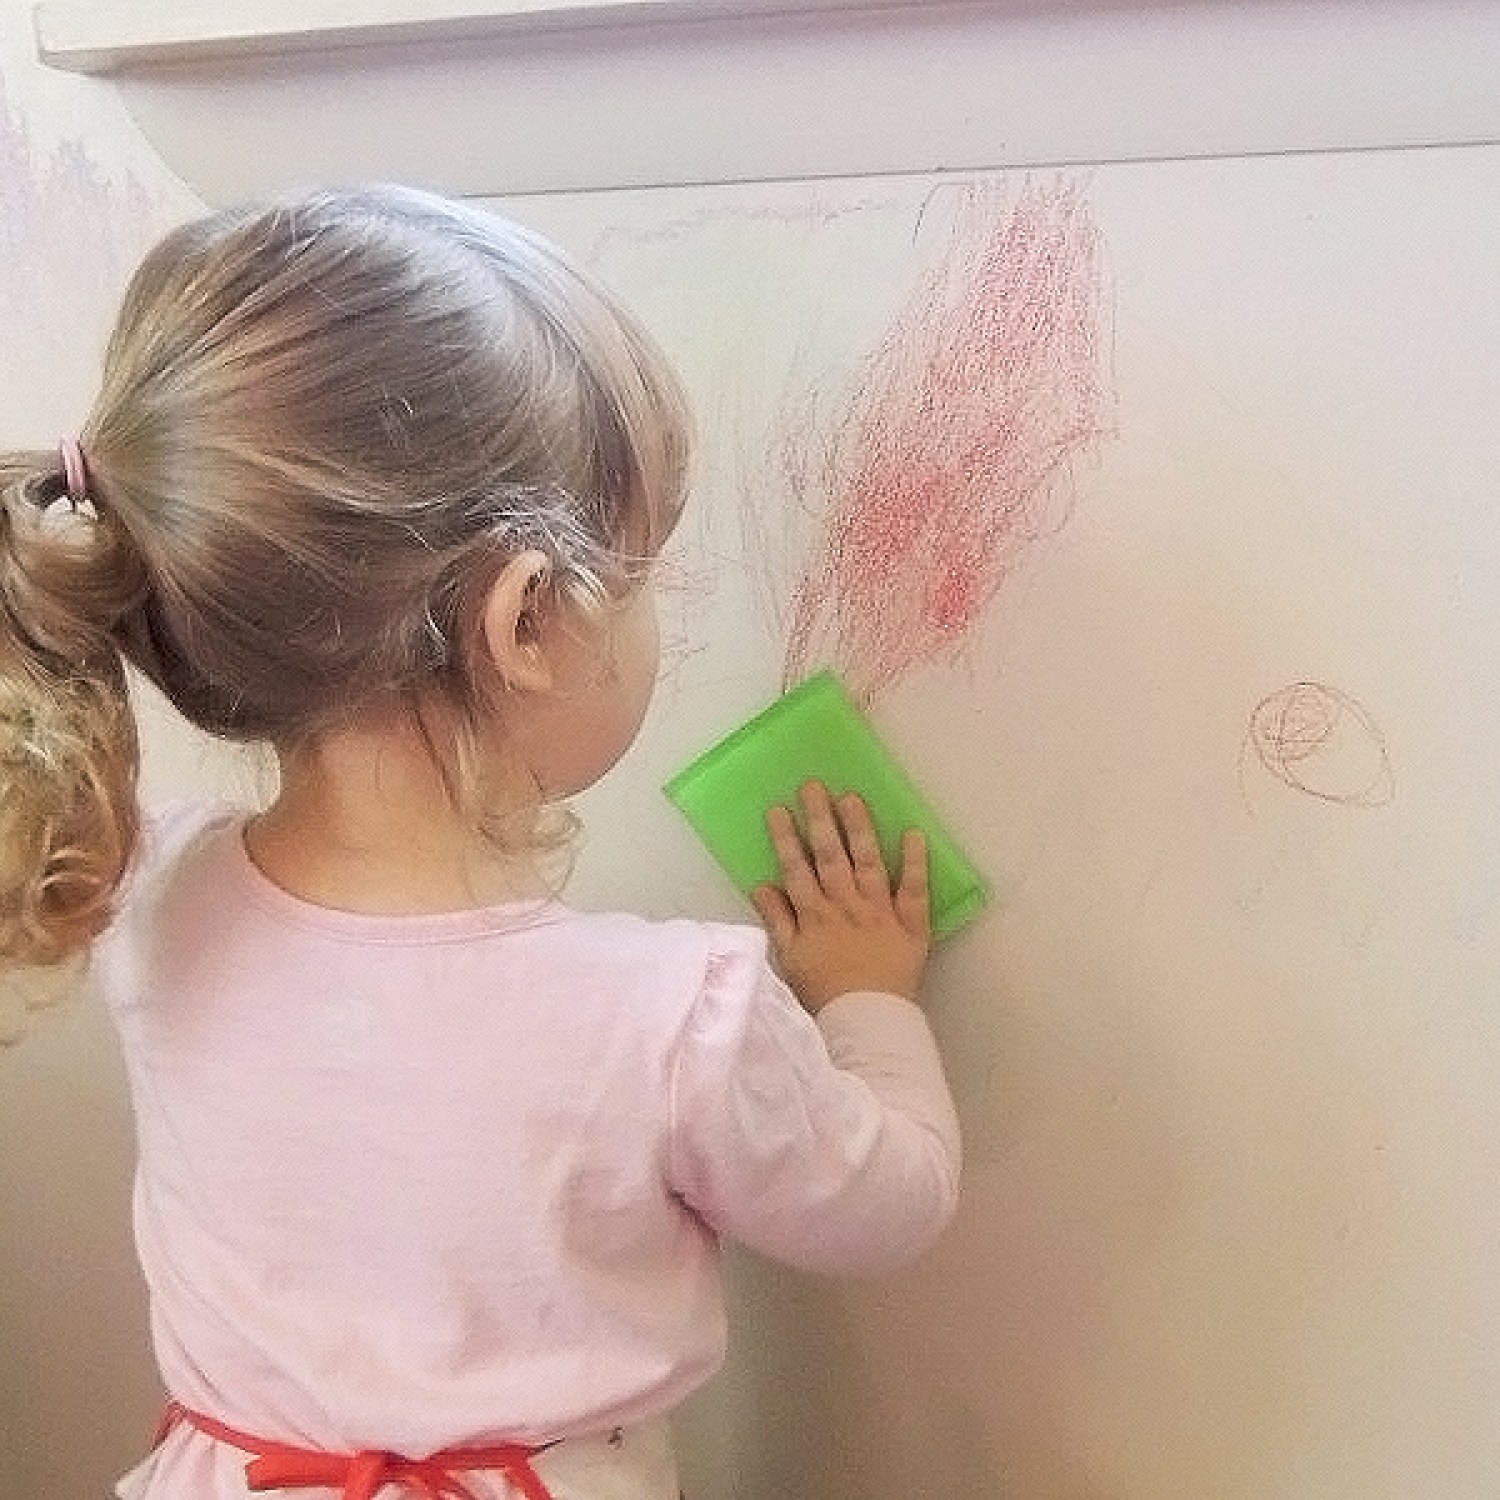 A child writing on a wall with crayon